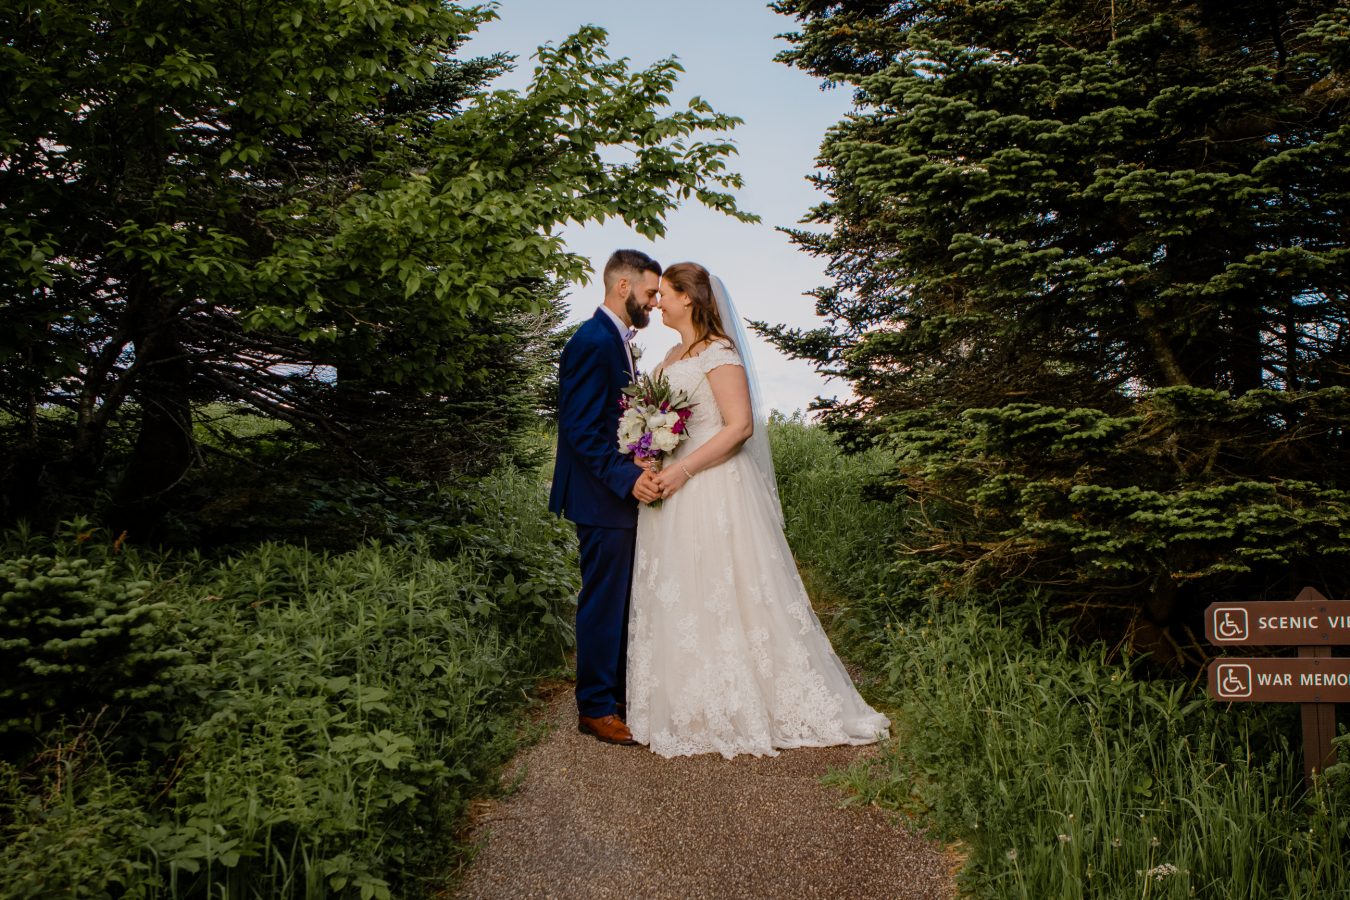 A wedding couple nuzzling noses in the trees New Haven CT wedding photographer